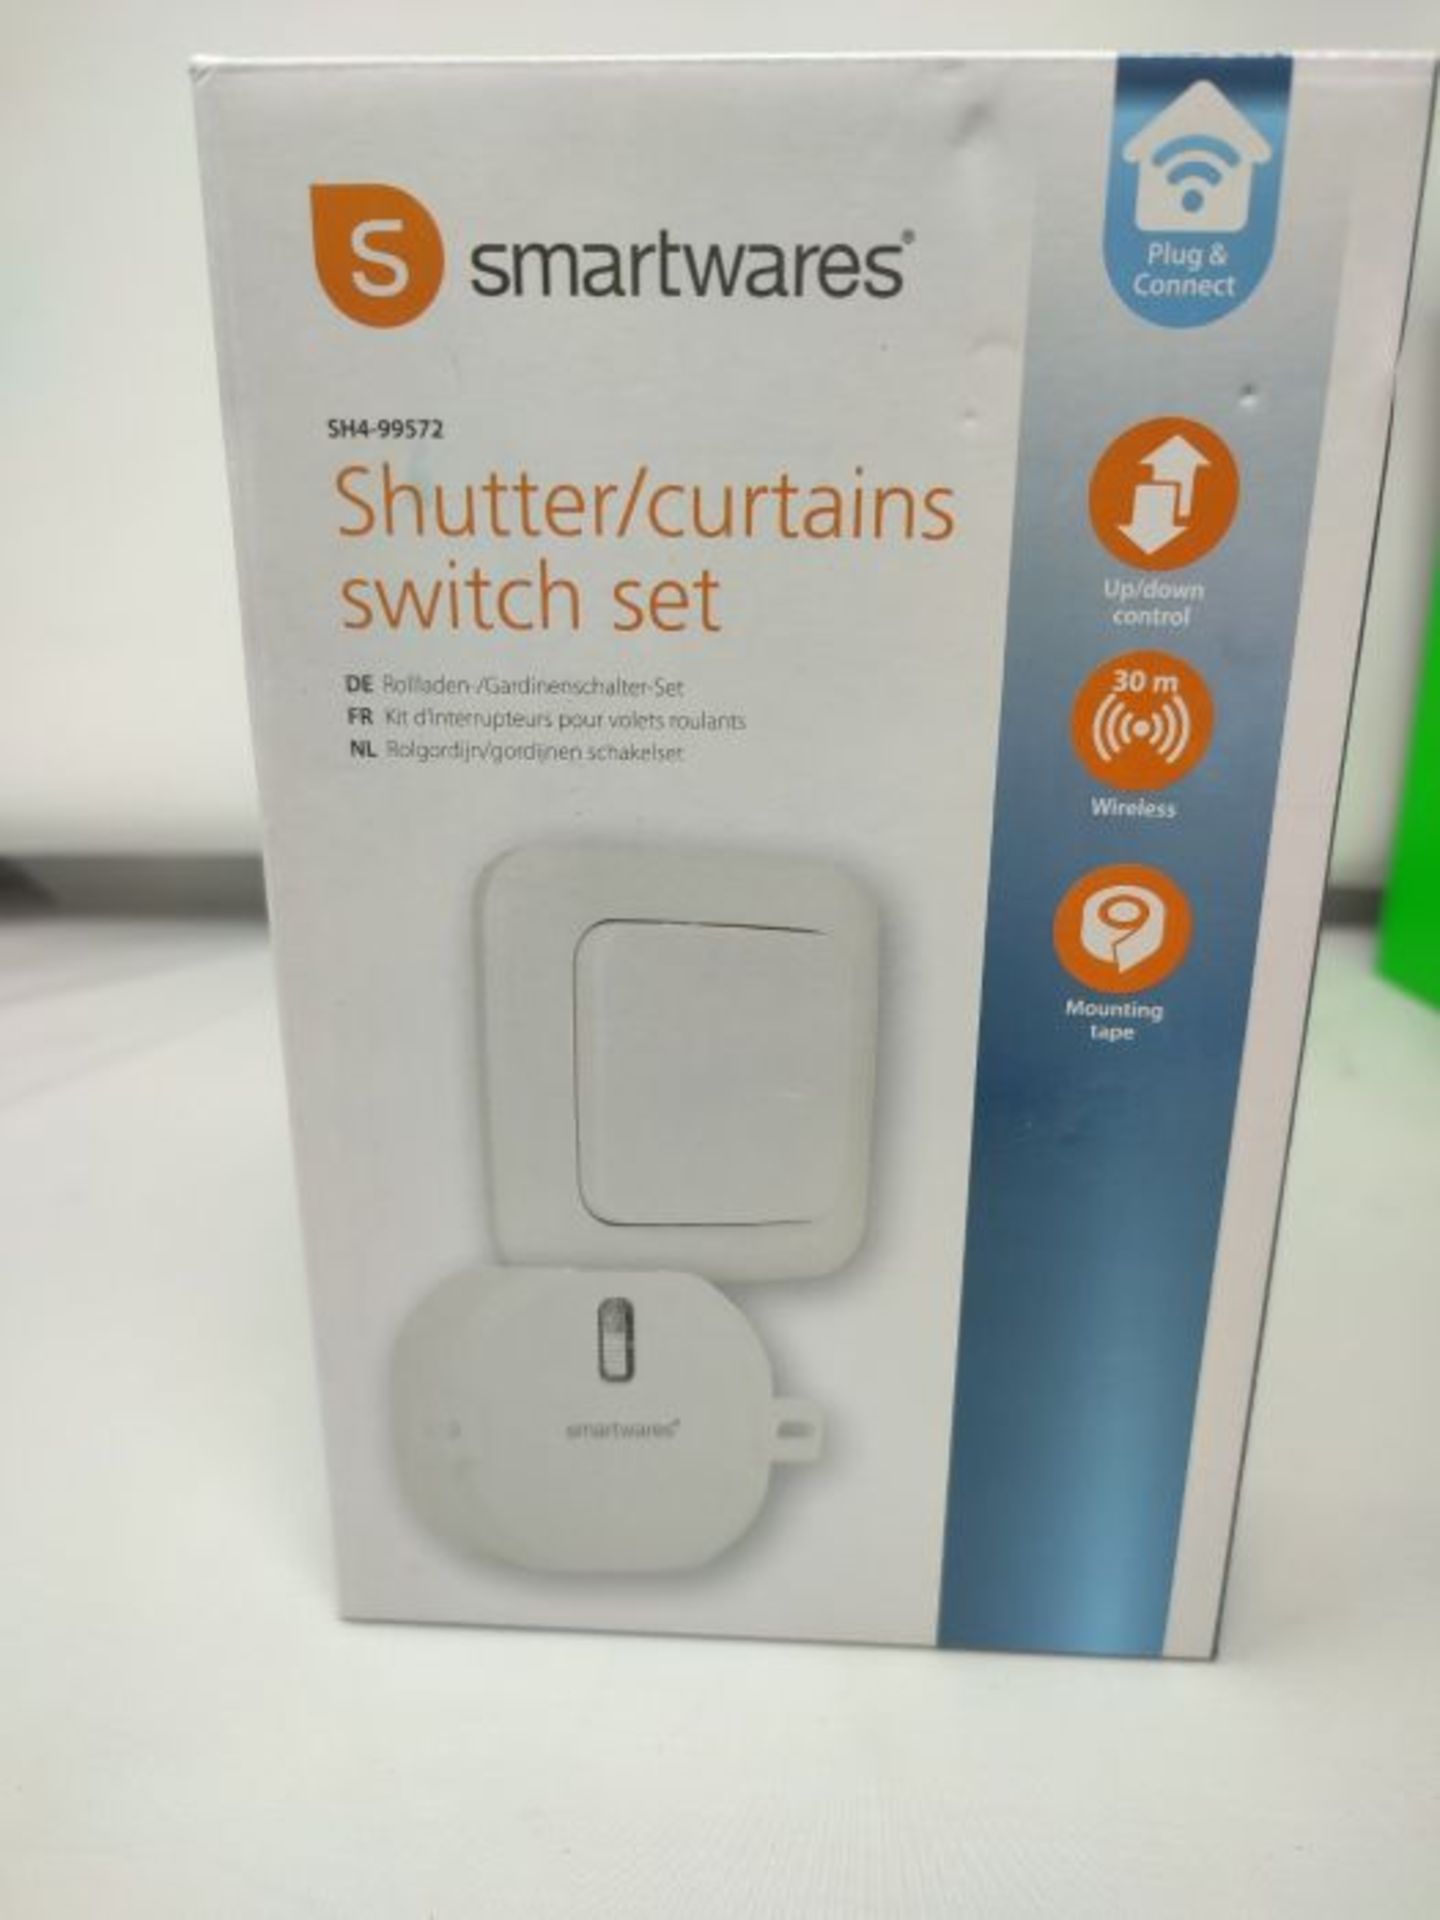 Smartwares Shutters and Blinds Radio Switch Set - Plug & Connect SH4-99572 - Image 2 of 3